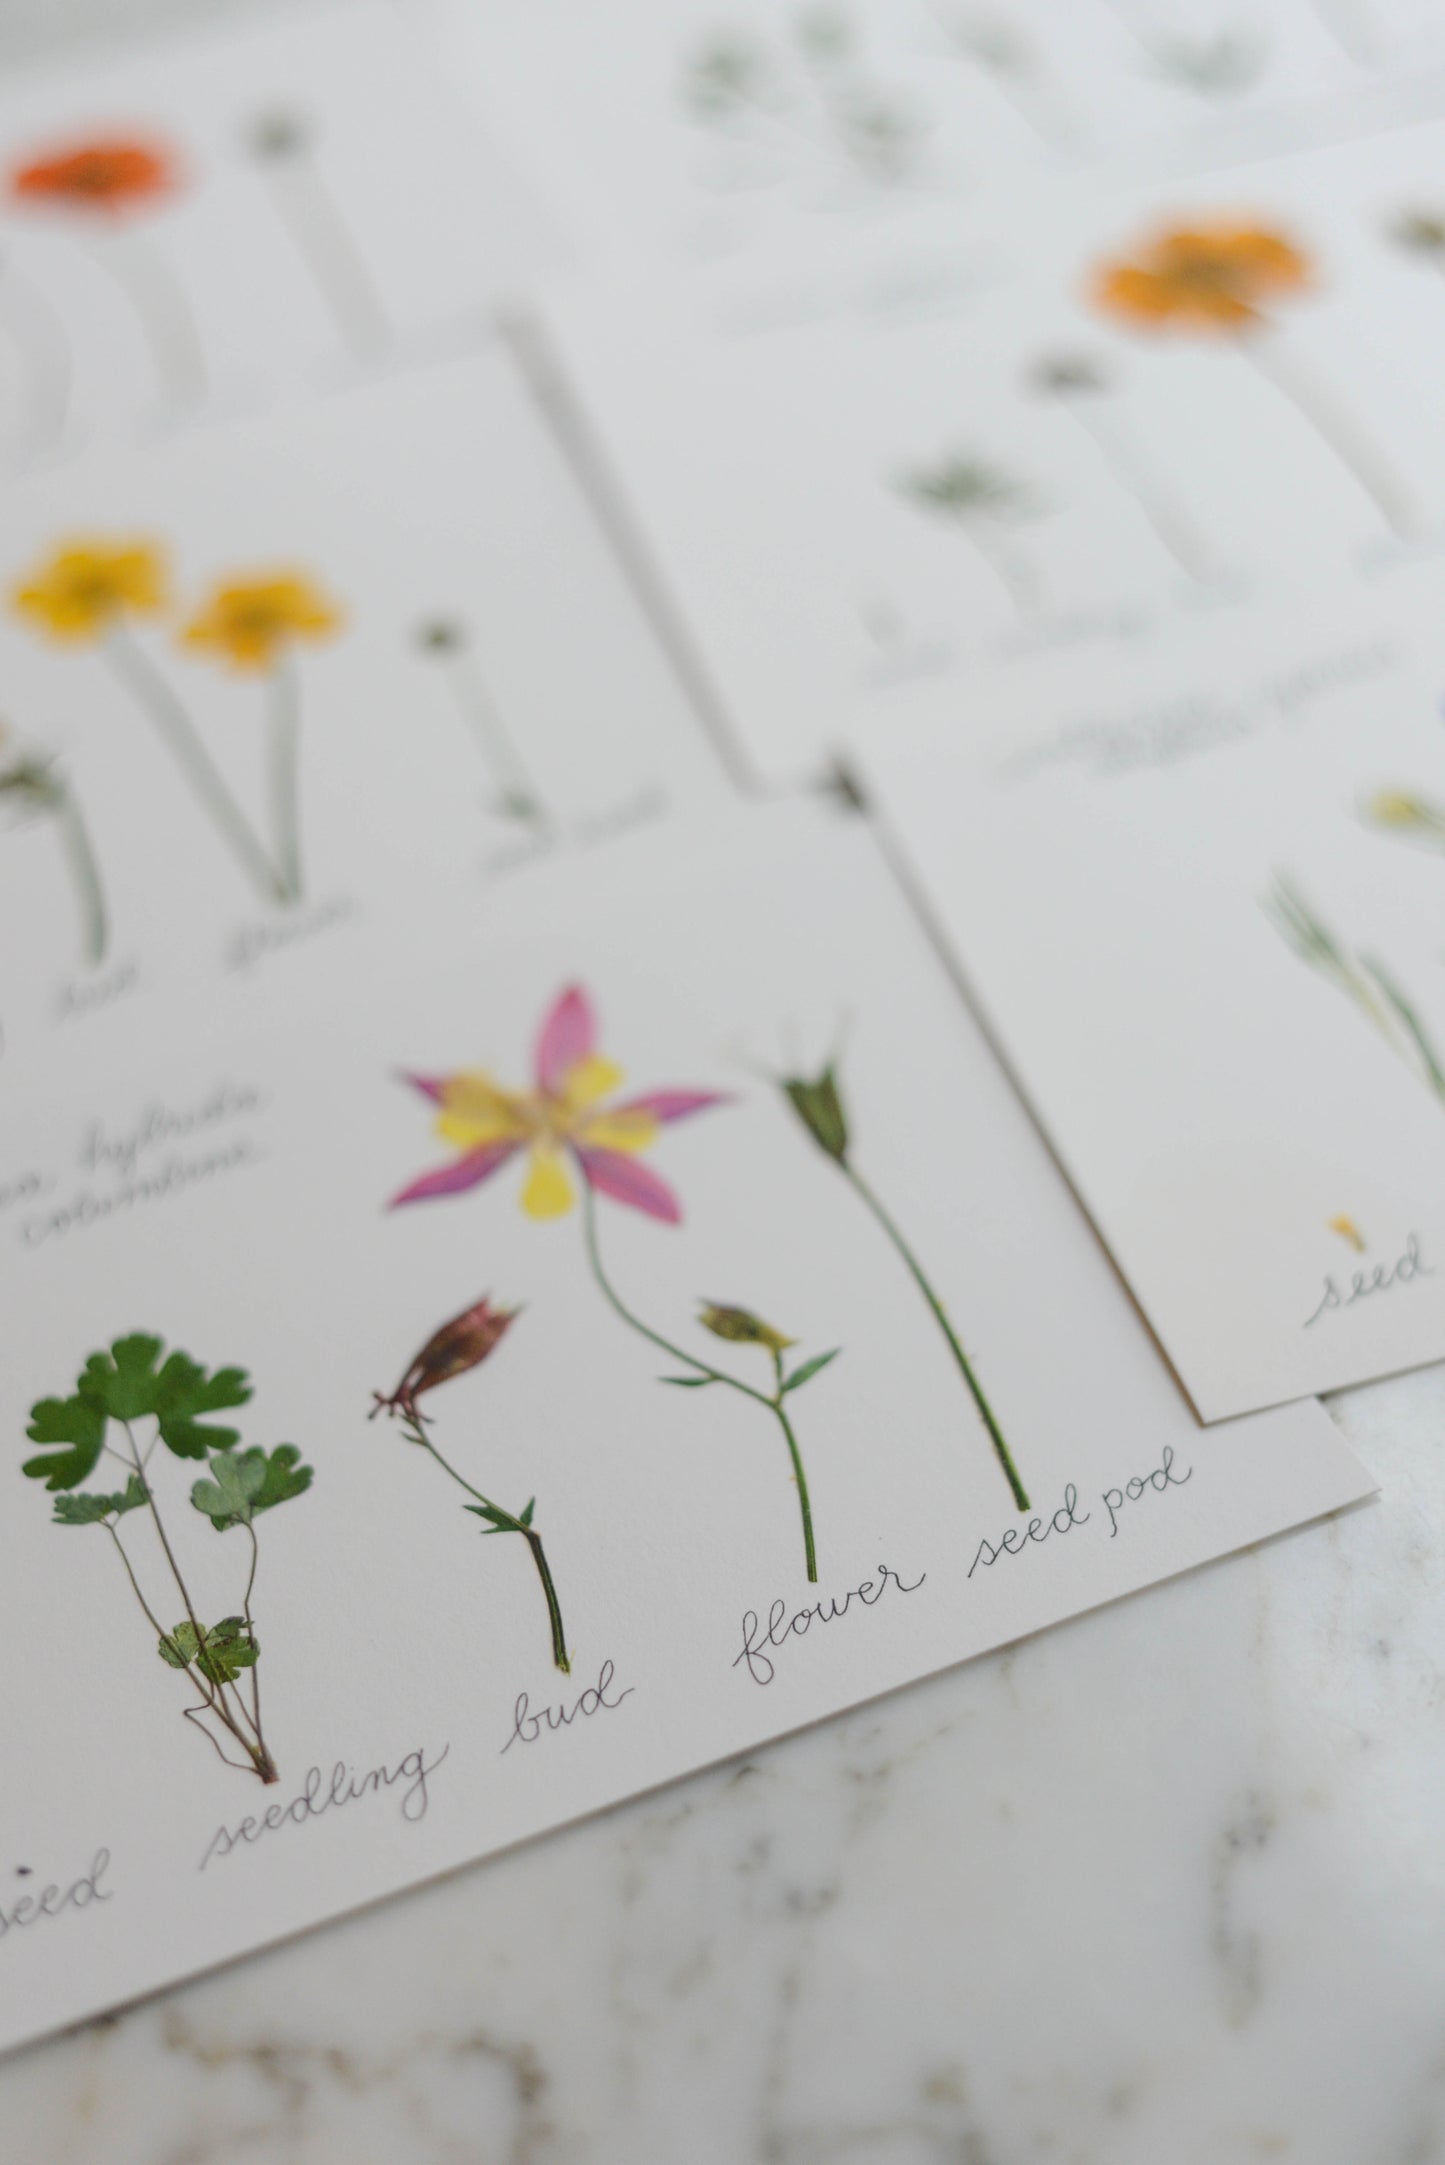 Lifecycle Collection - Art Print of Pressed Flowers